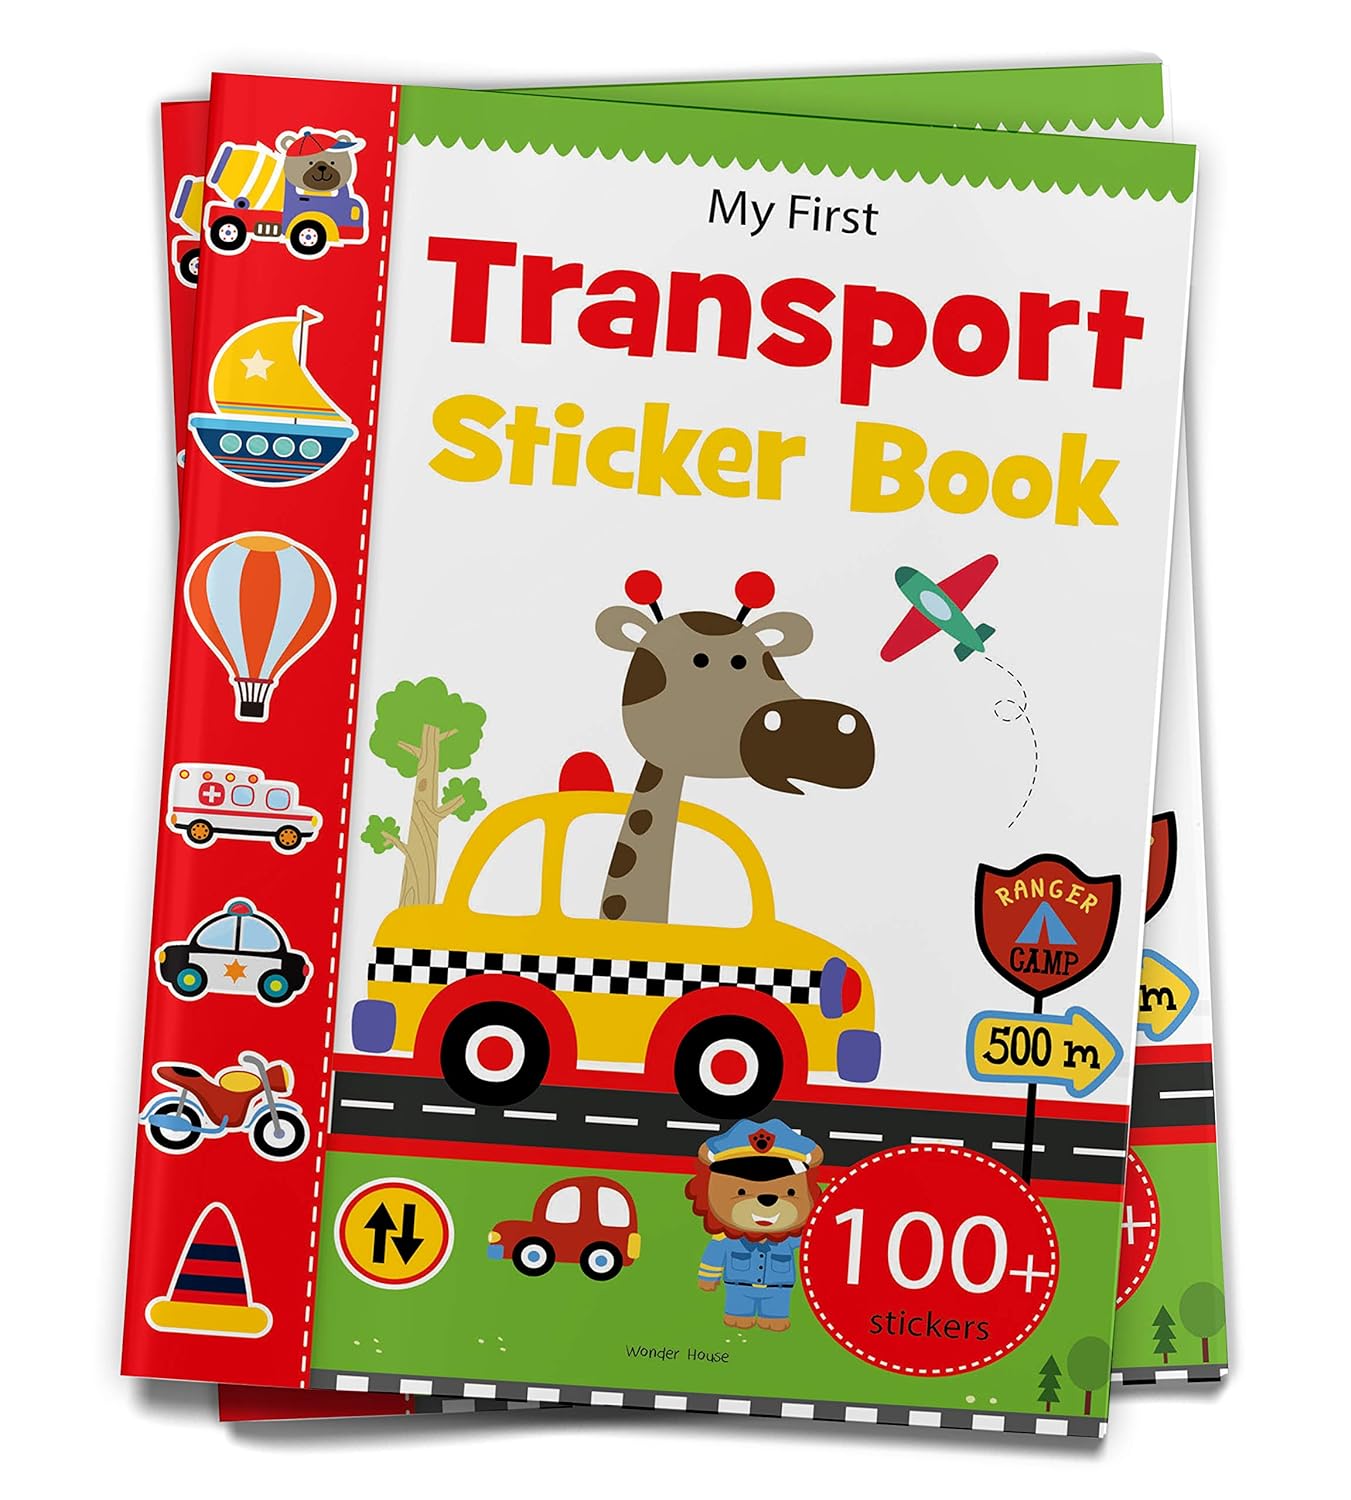 My First Transport Sticker Book: with 100+ Stickers